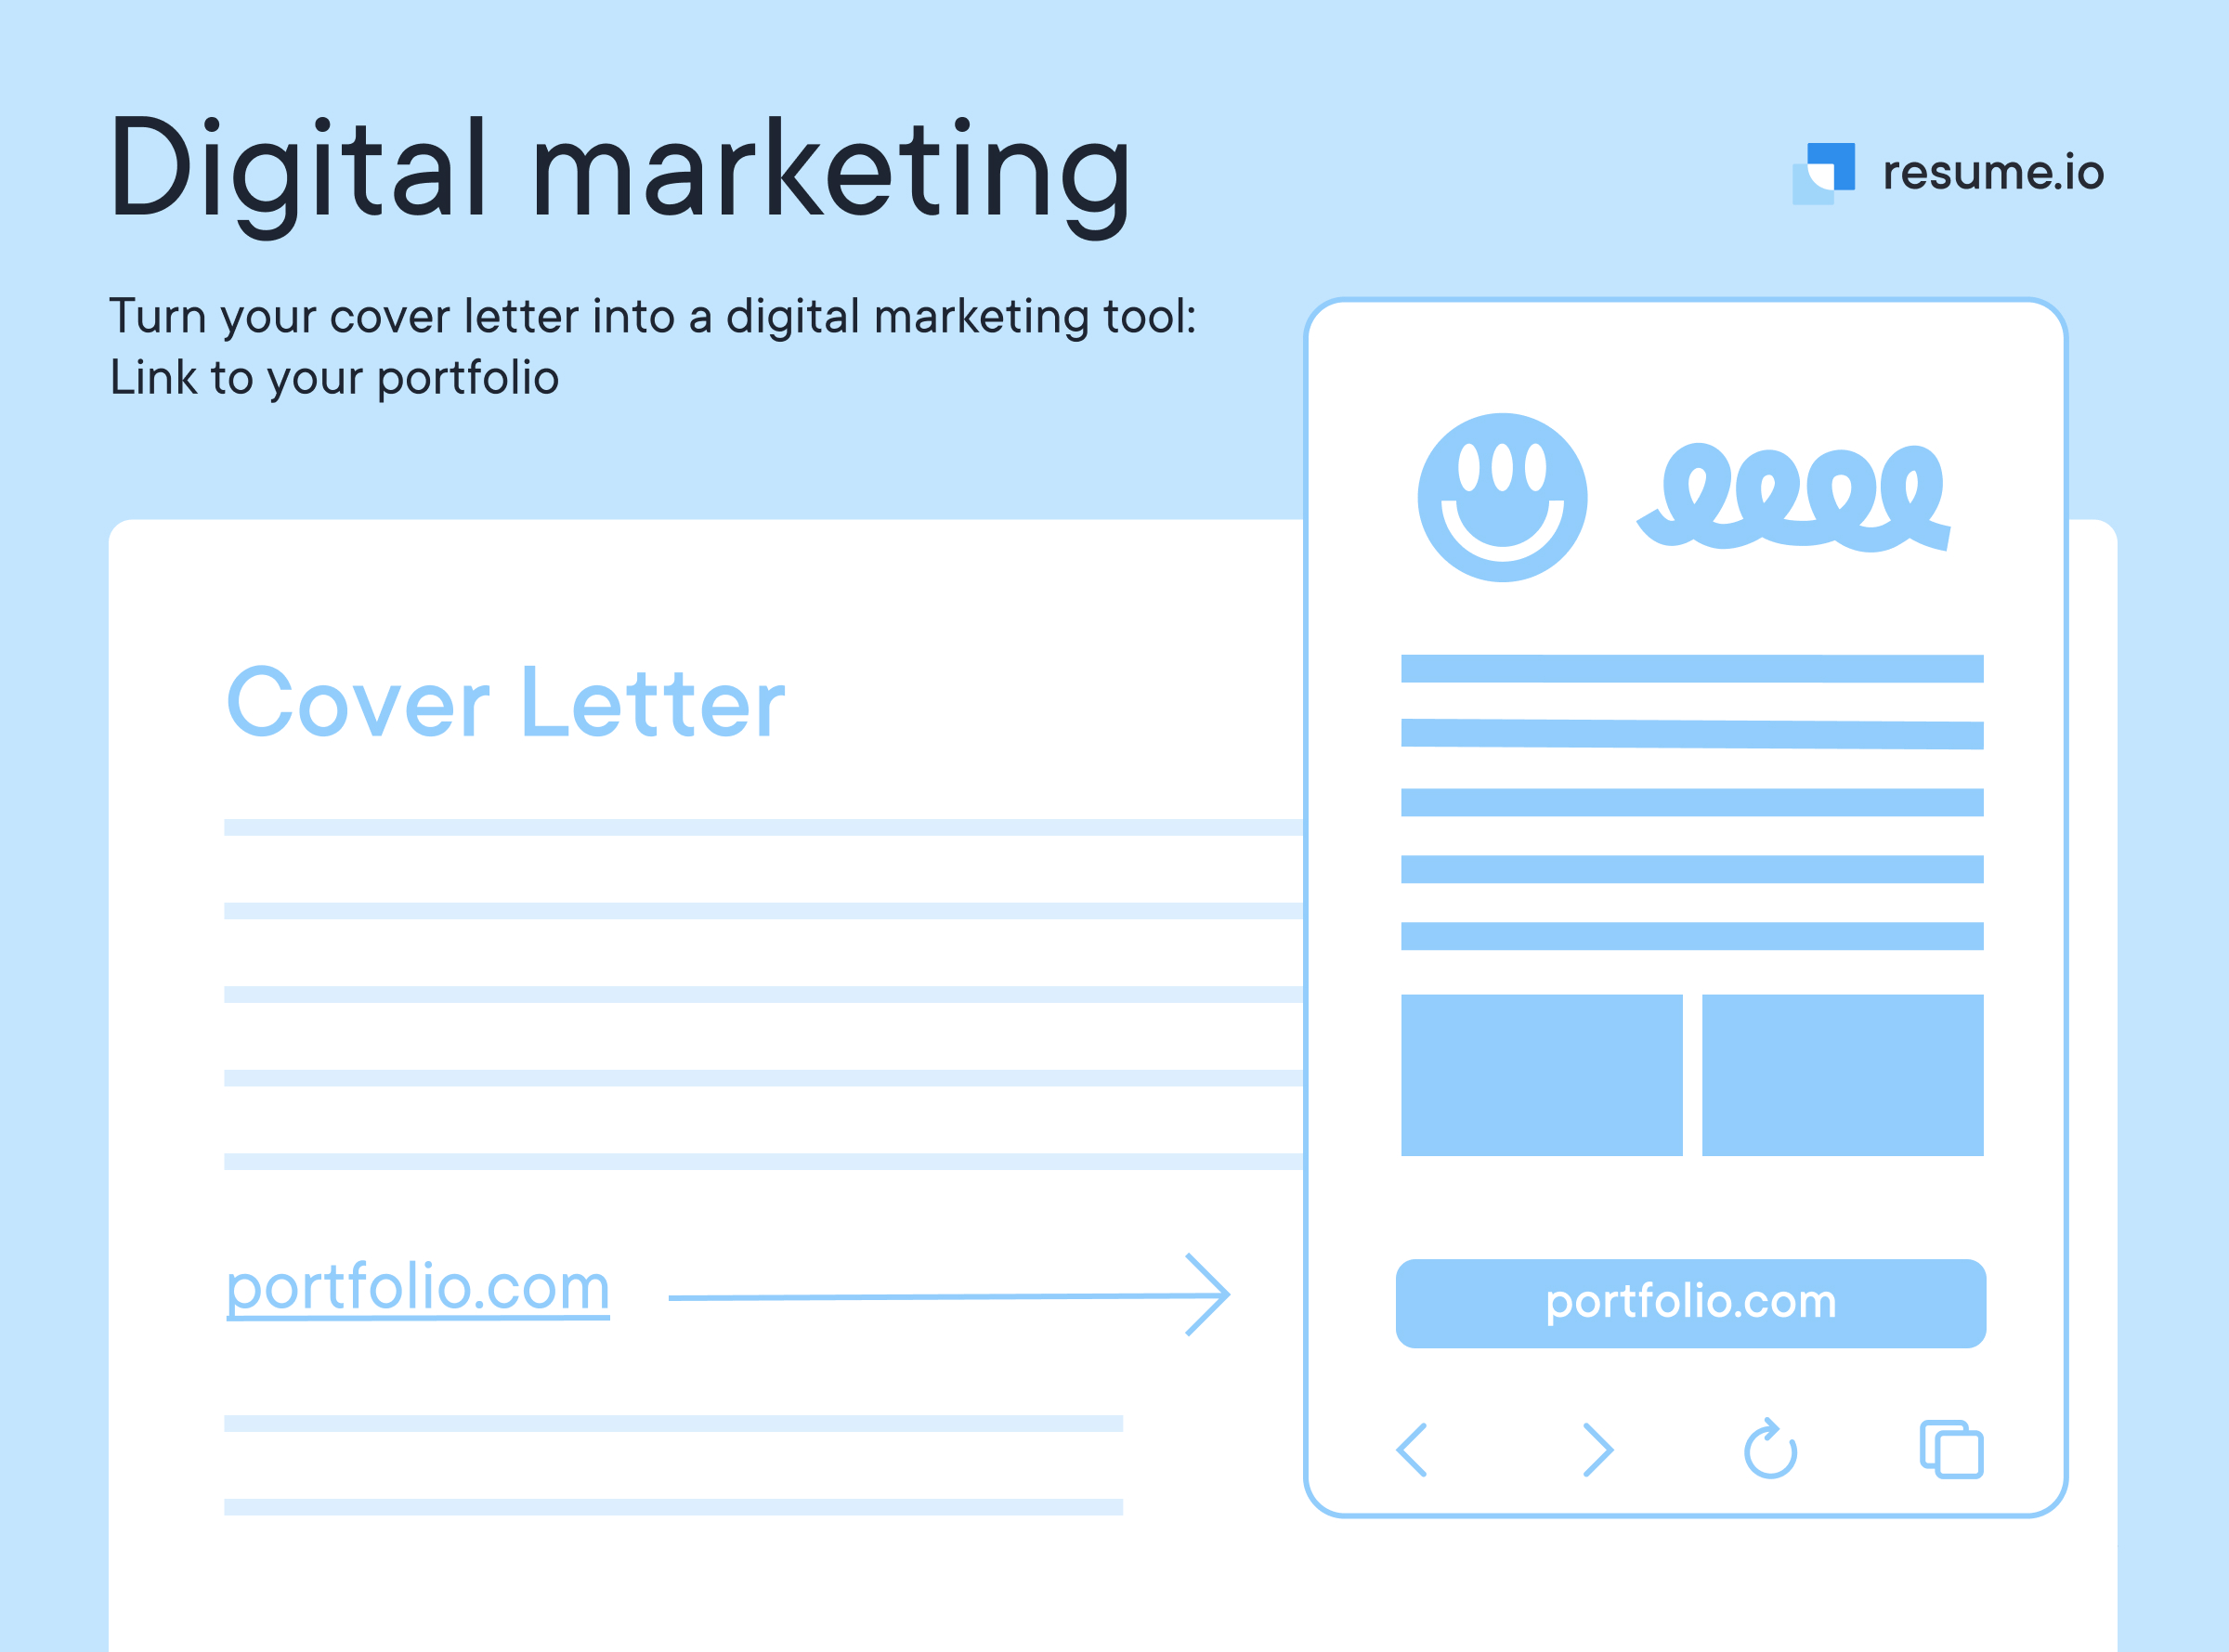 Turn your cover letter into a digital marketing tool: Link to your portfolio!